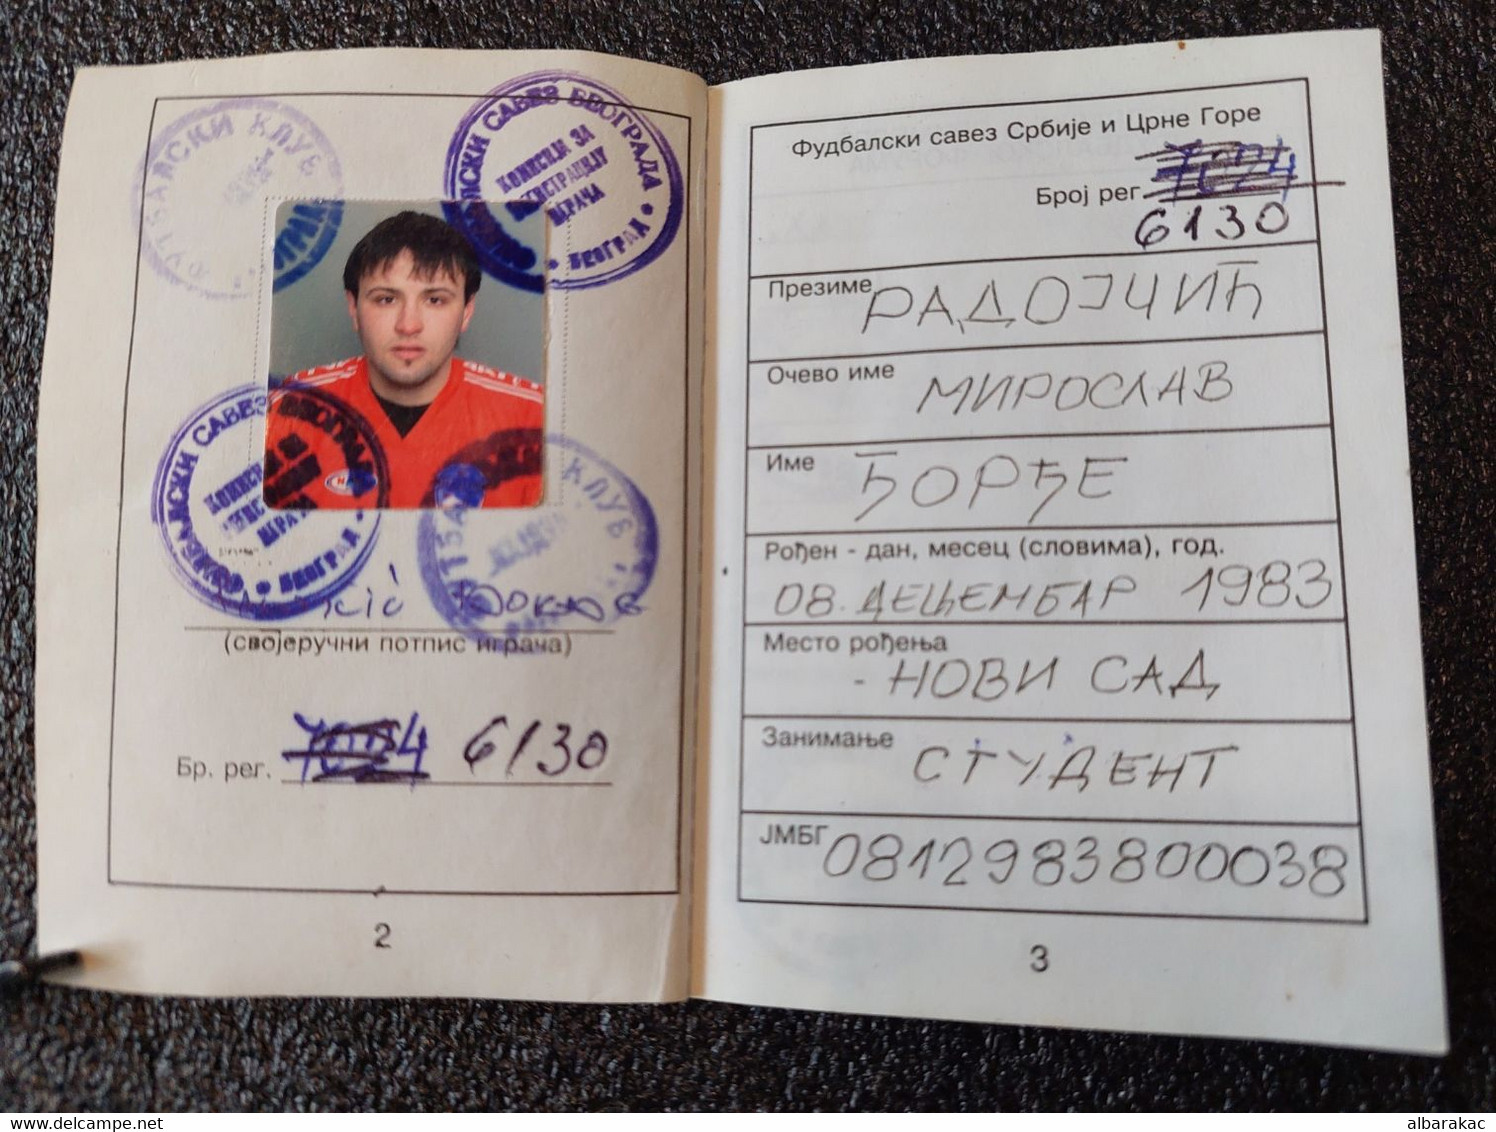 Football Soccer Union SCG Serbia , Beograd - ID Card With Additional Stamp 2007 , And Photo - Apparel, Souvenirs & Other